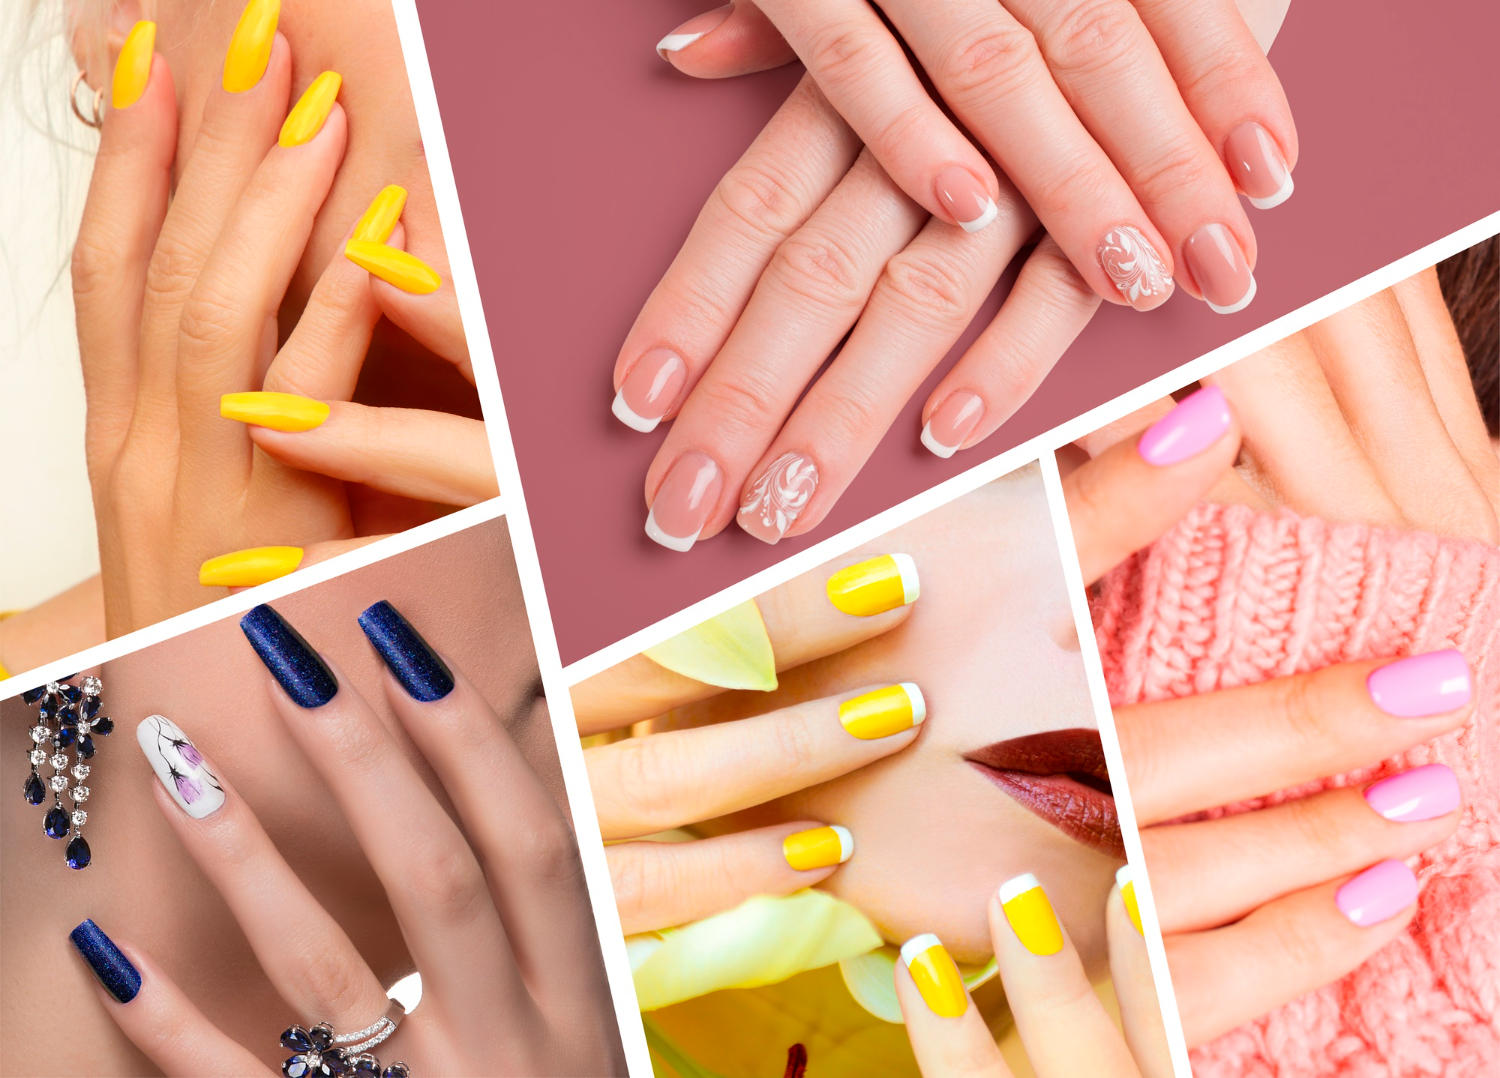 Nails Guelph: Your Ultimate Guide to Salon Services and Trends